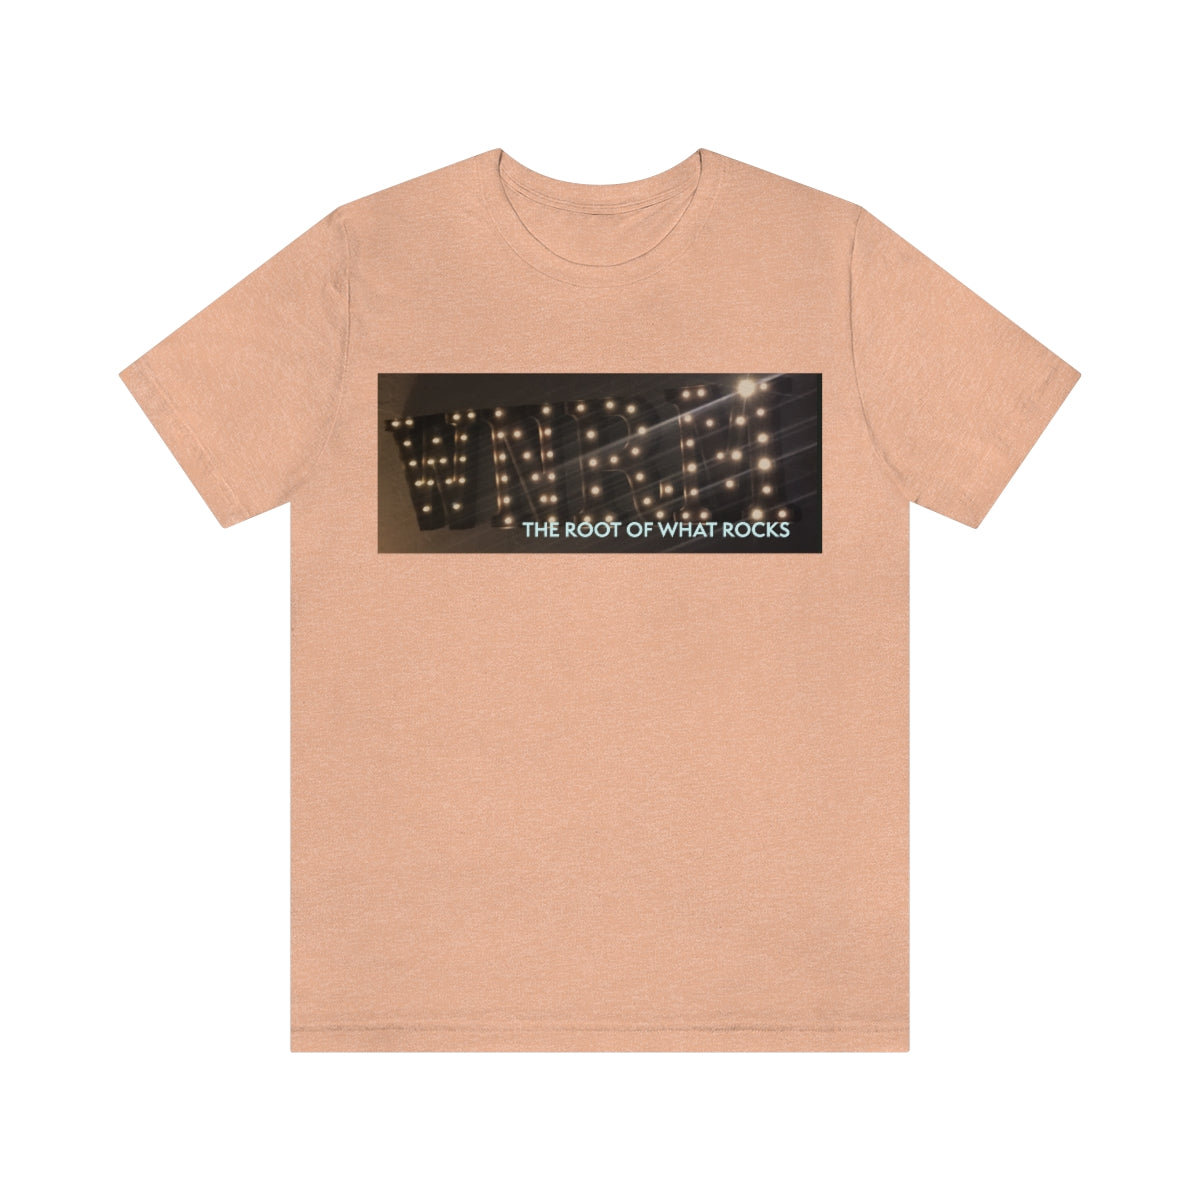 Name In Lights Tee, in dusty pink on a white background